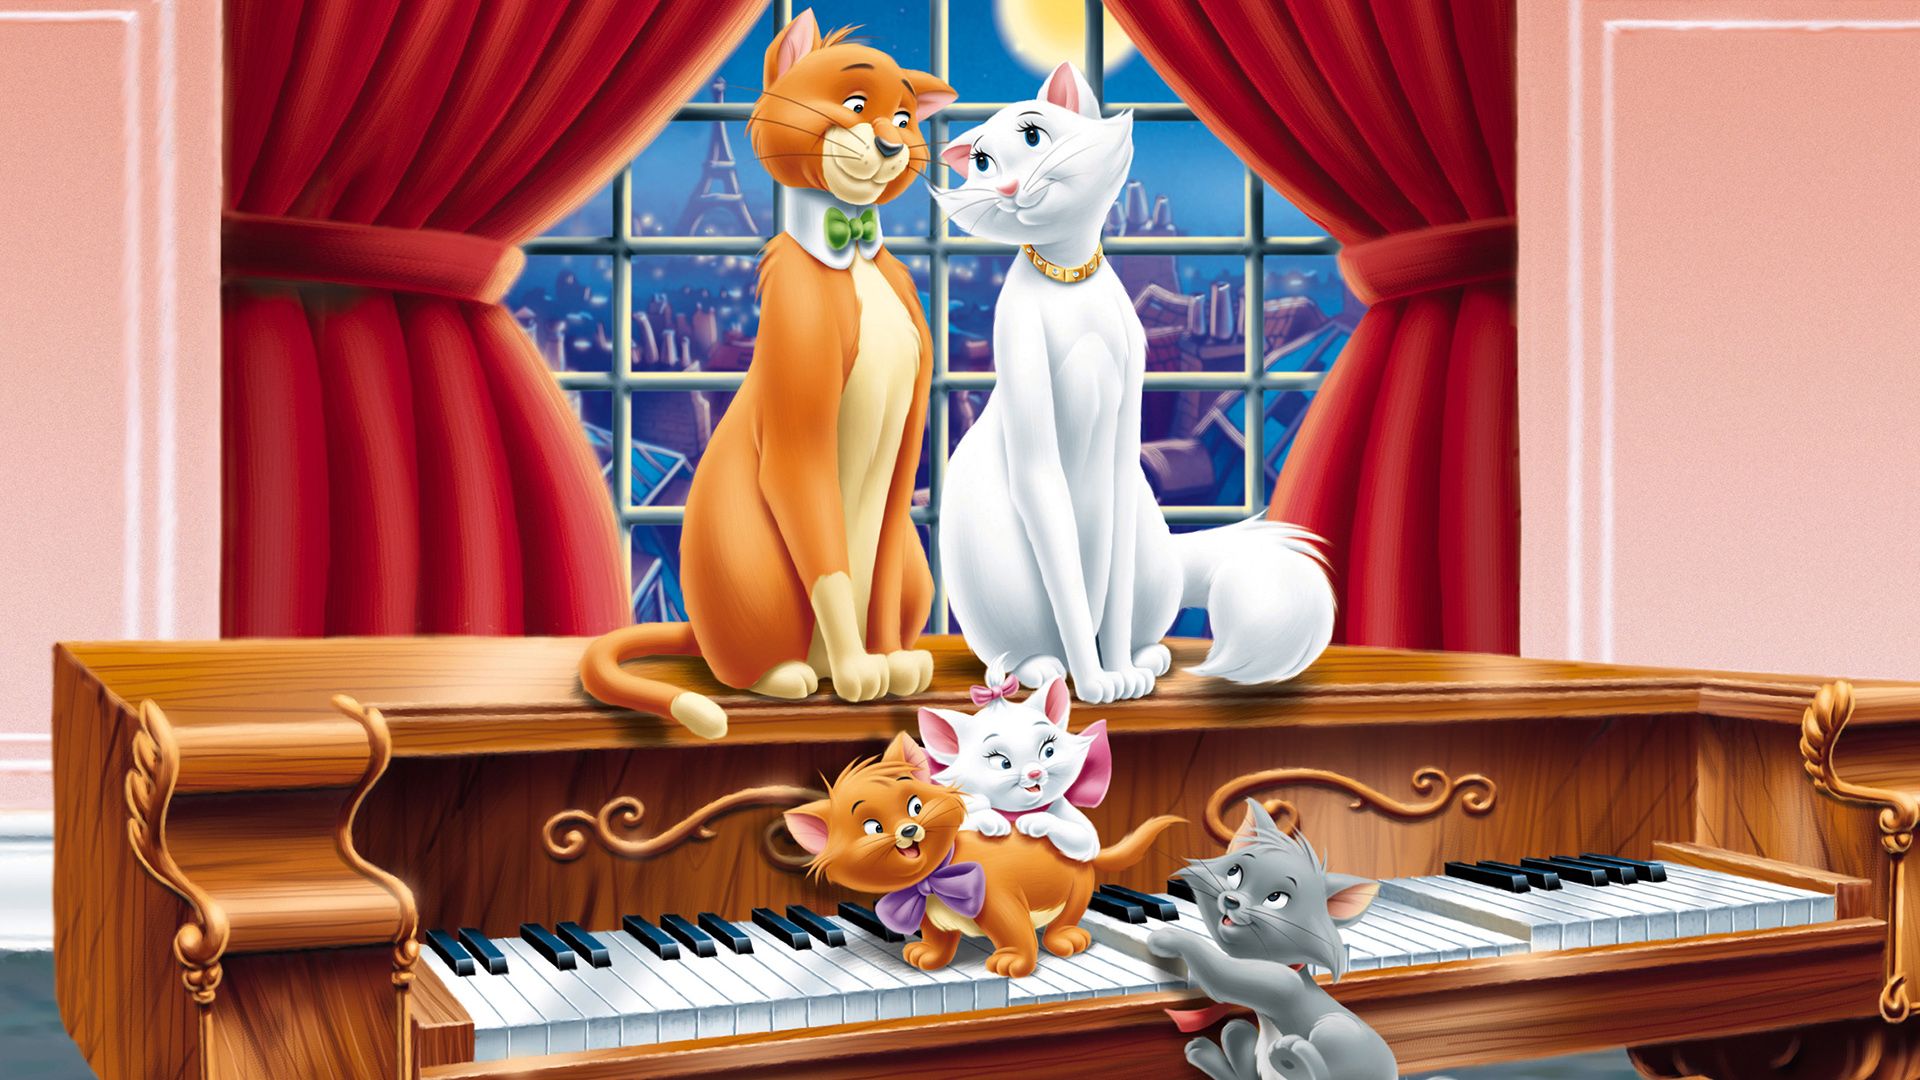 The AristoCats background